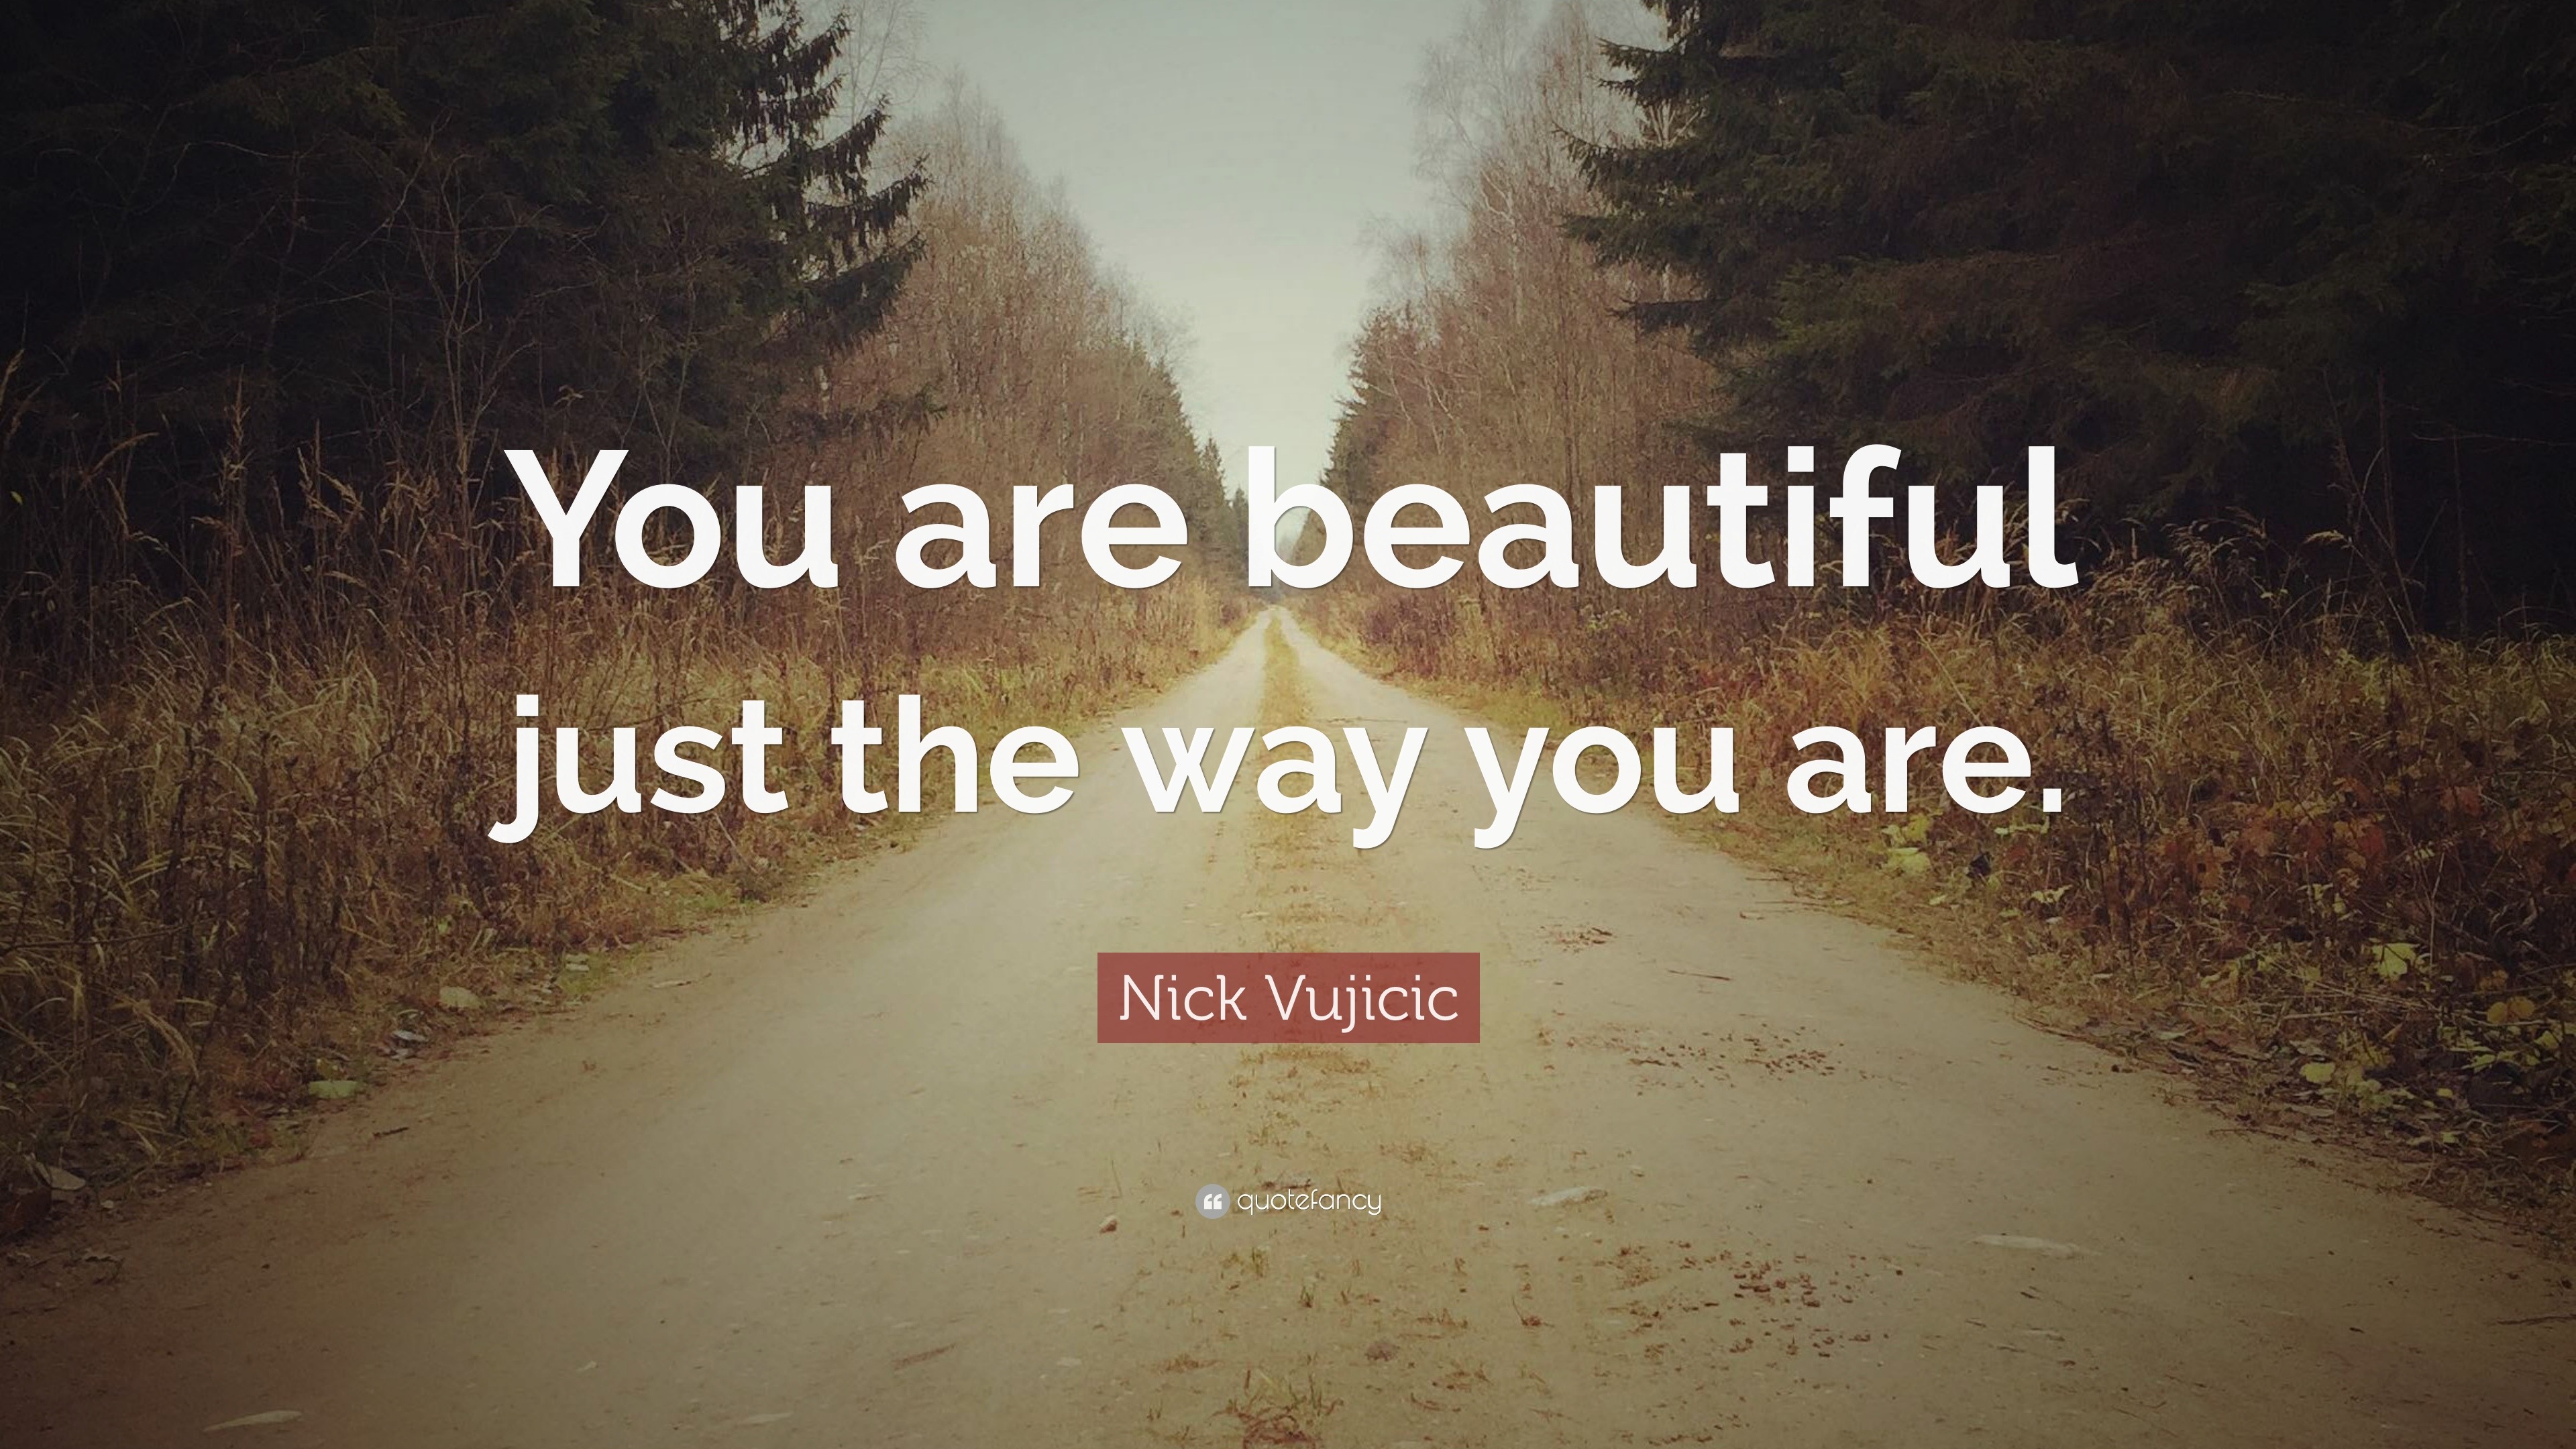 Quotes About Being Beautiful The Way You Are